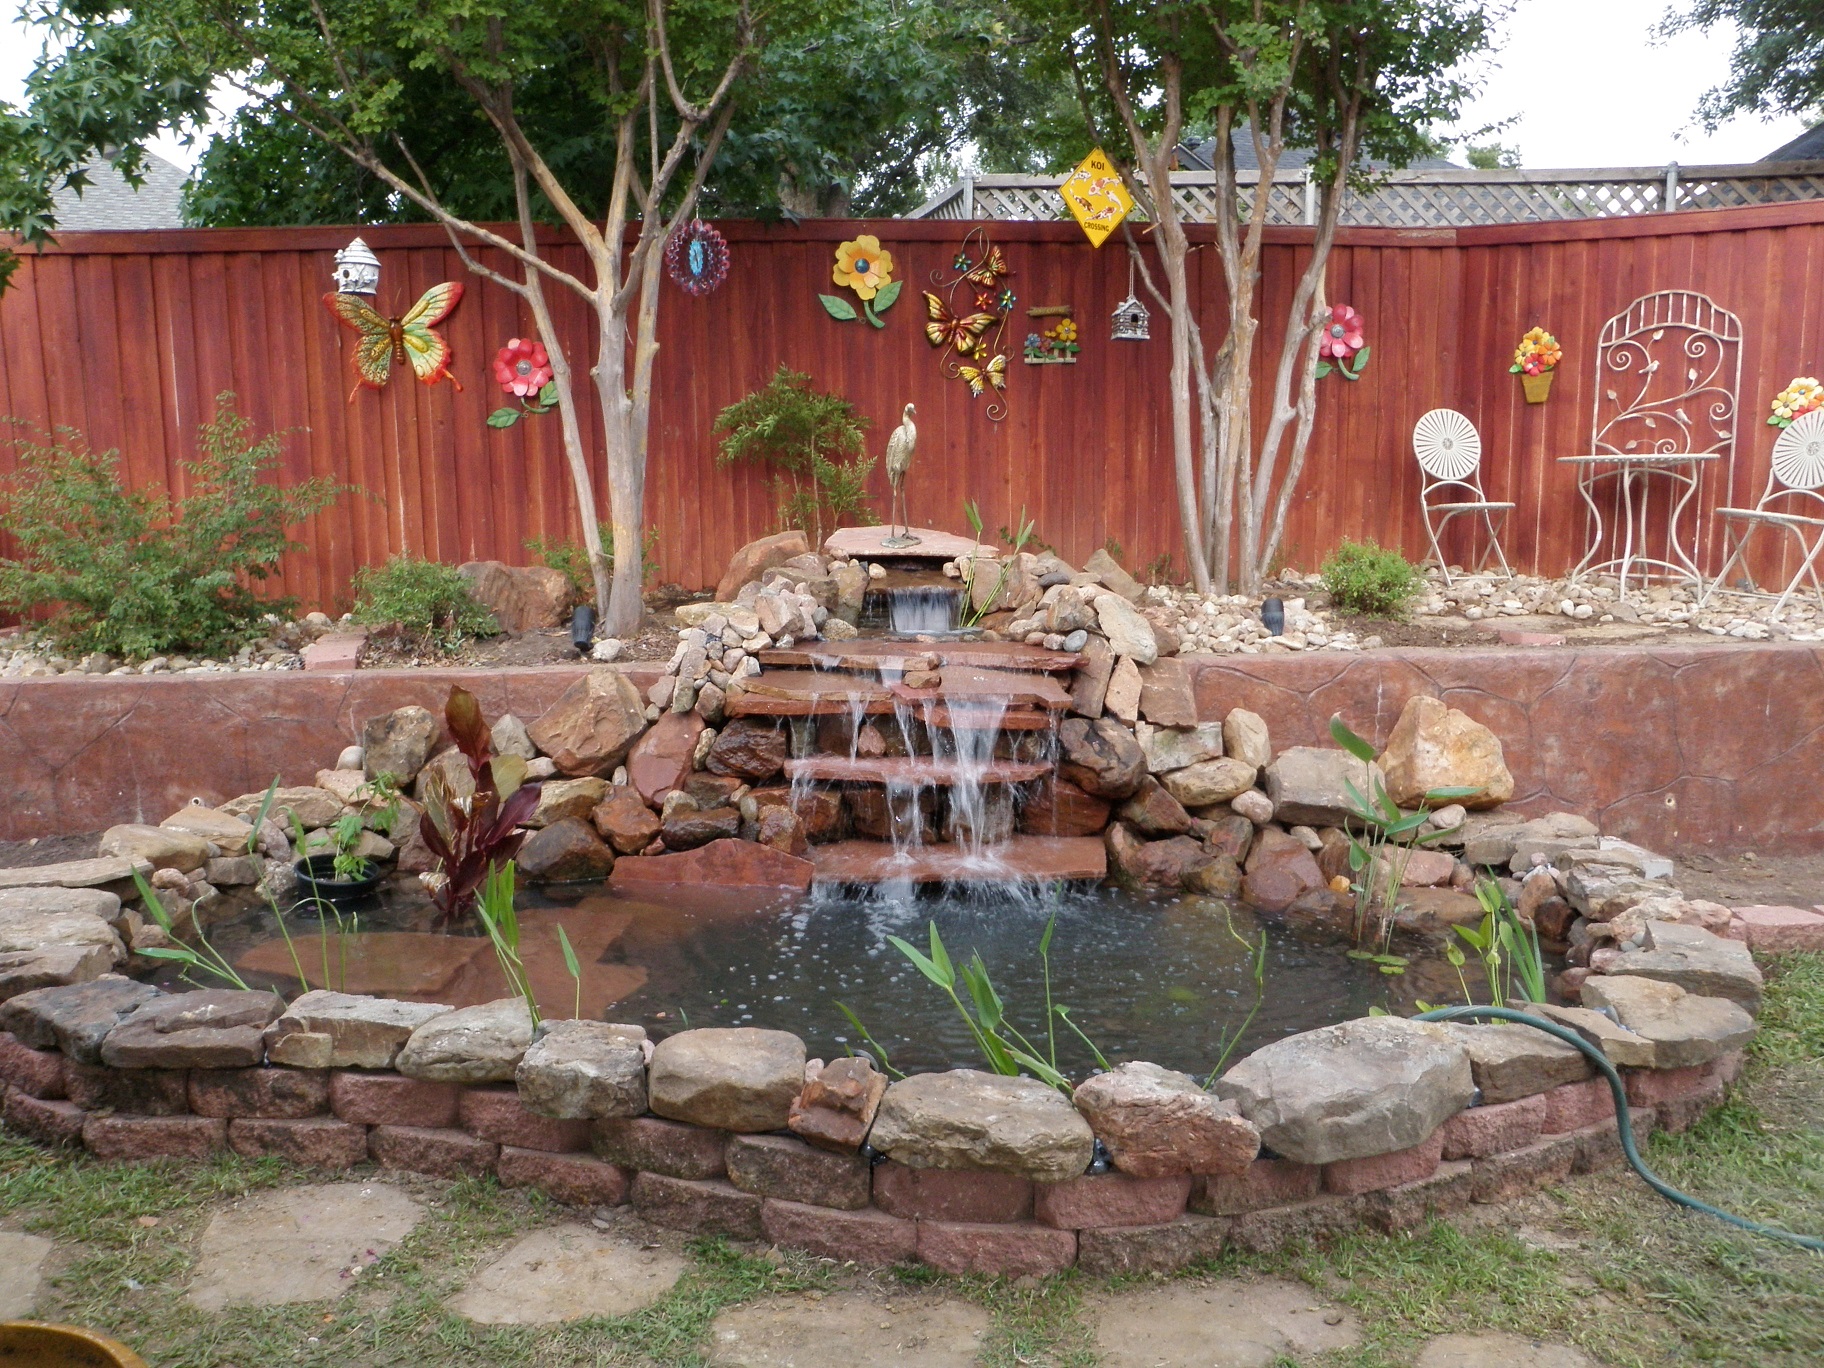 An Incredible Yard with a Wine Fountain Built by @stonebridgepond  #waterfall #pond #koipond #backyard